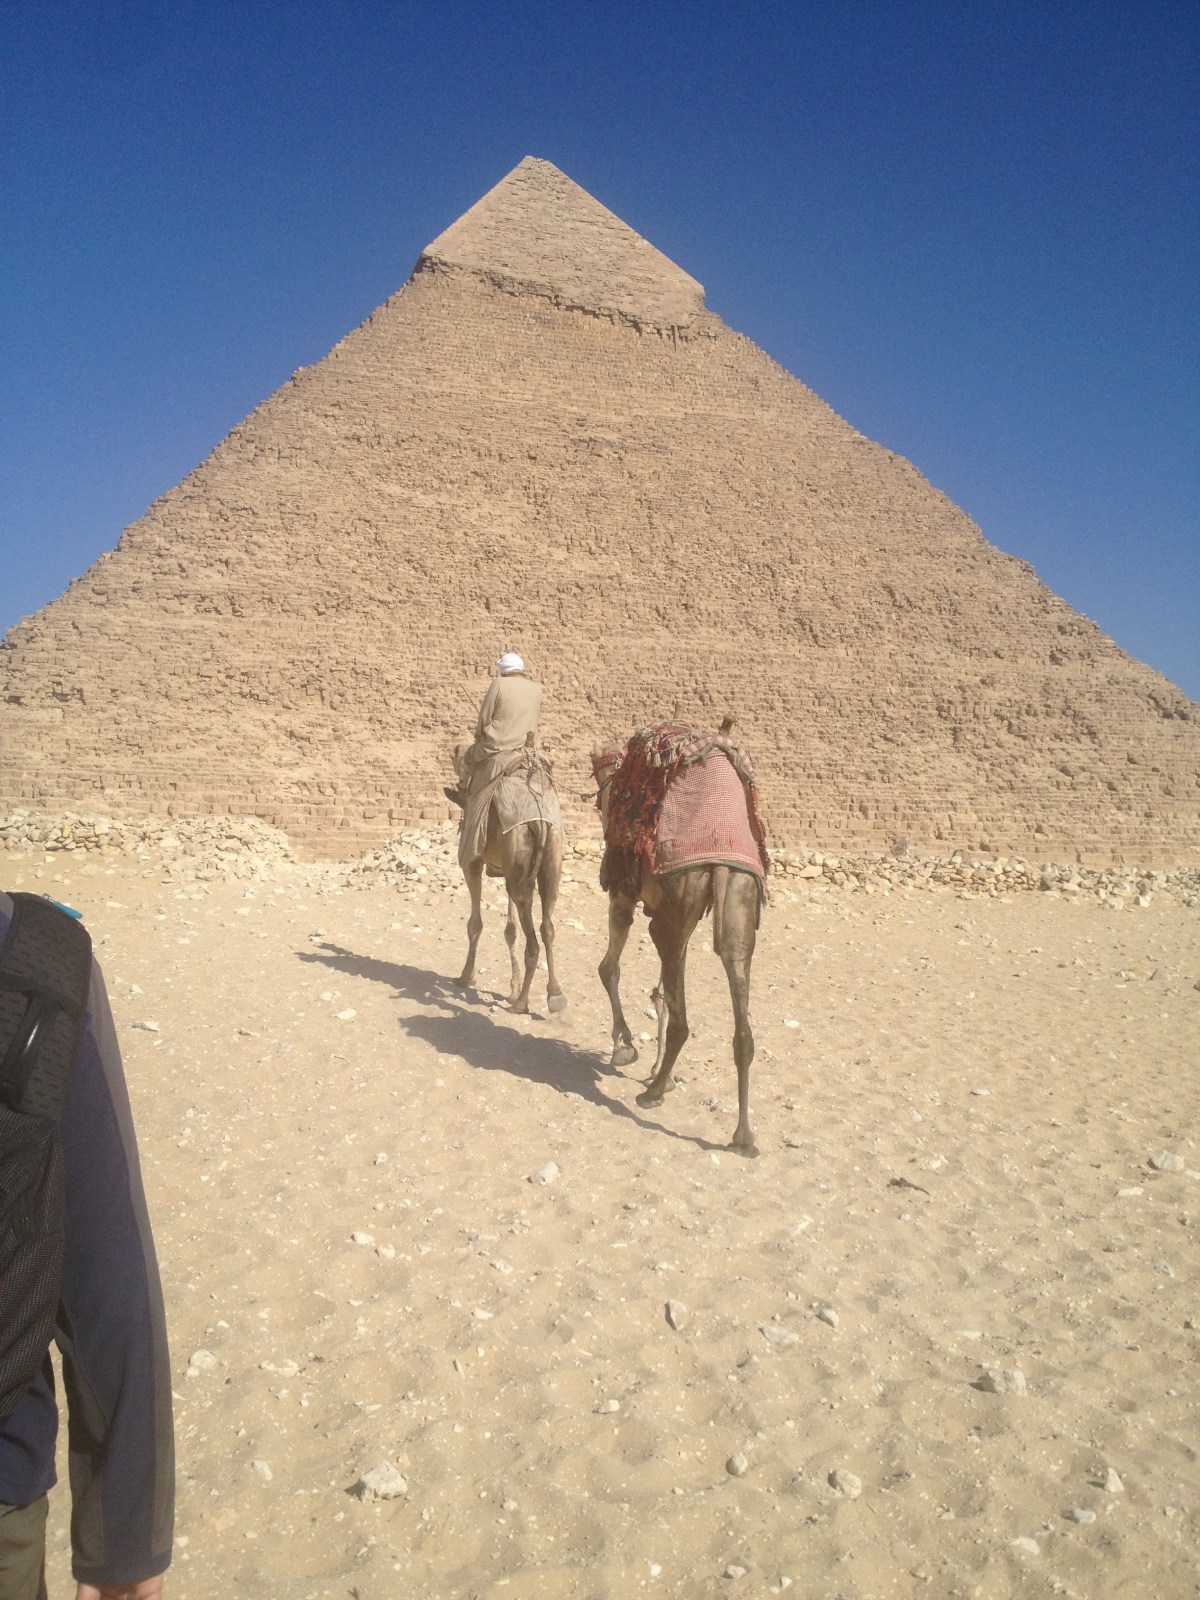 Egypt Tourism: Sandstorm at the Pyramids in Cairo – Bruised Banana